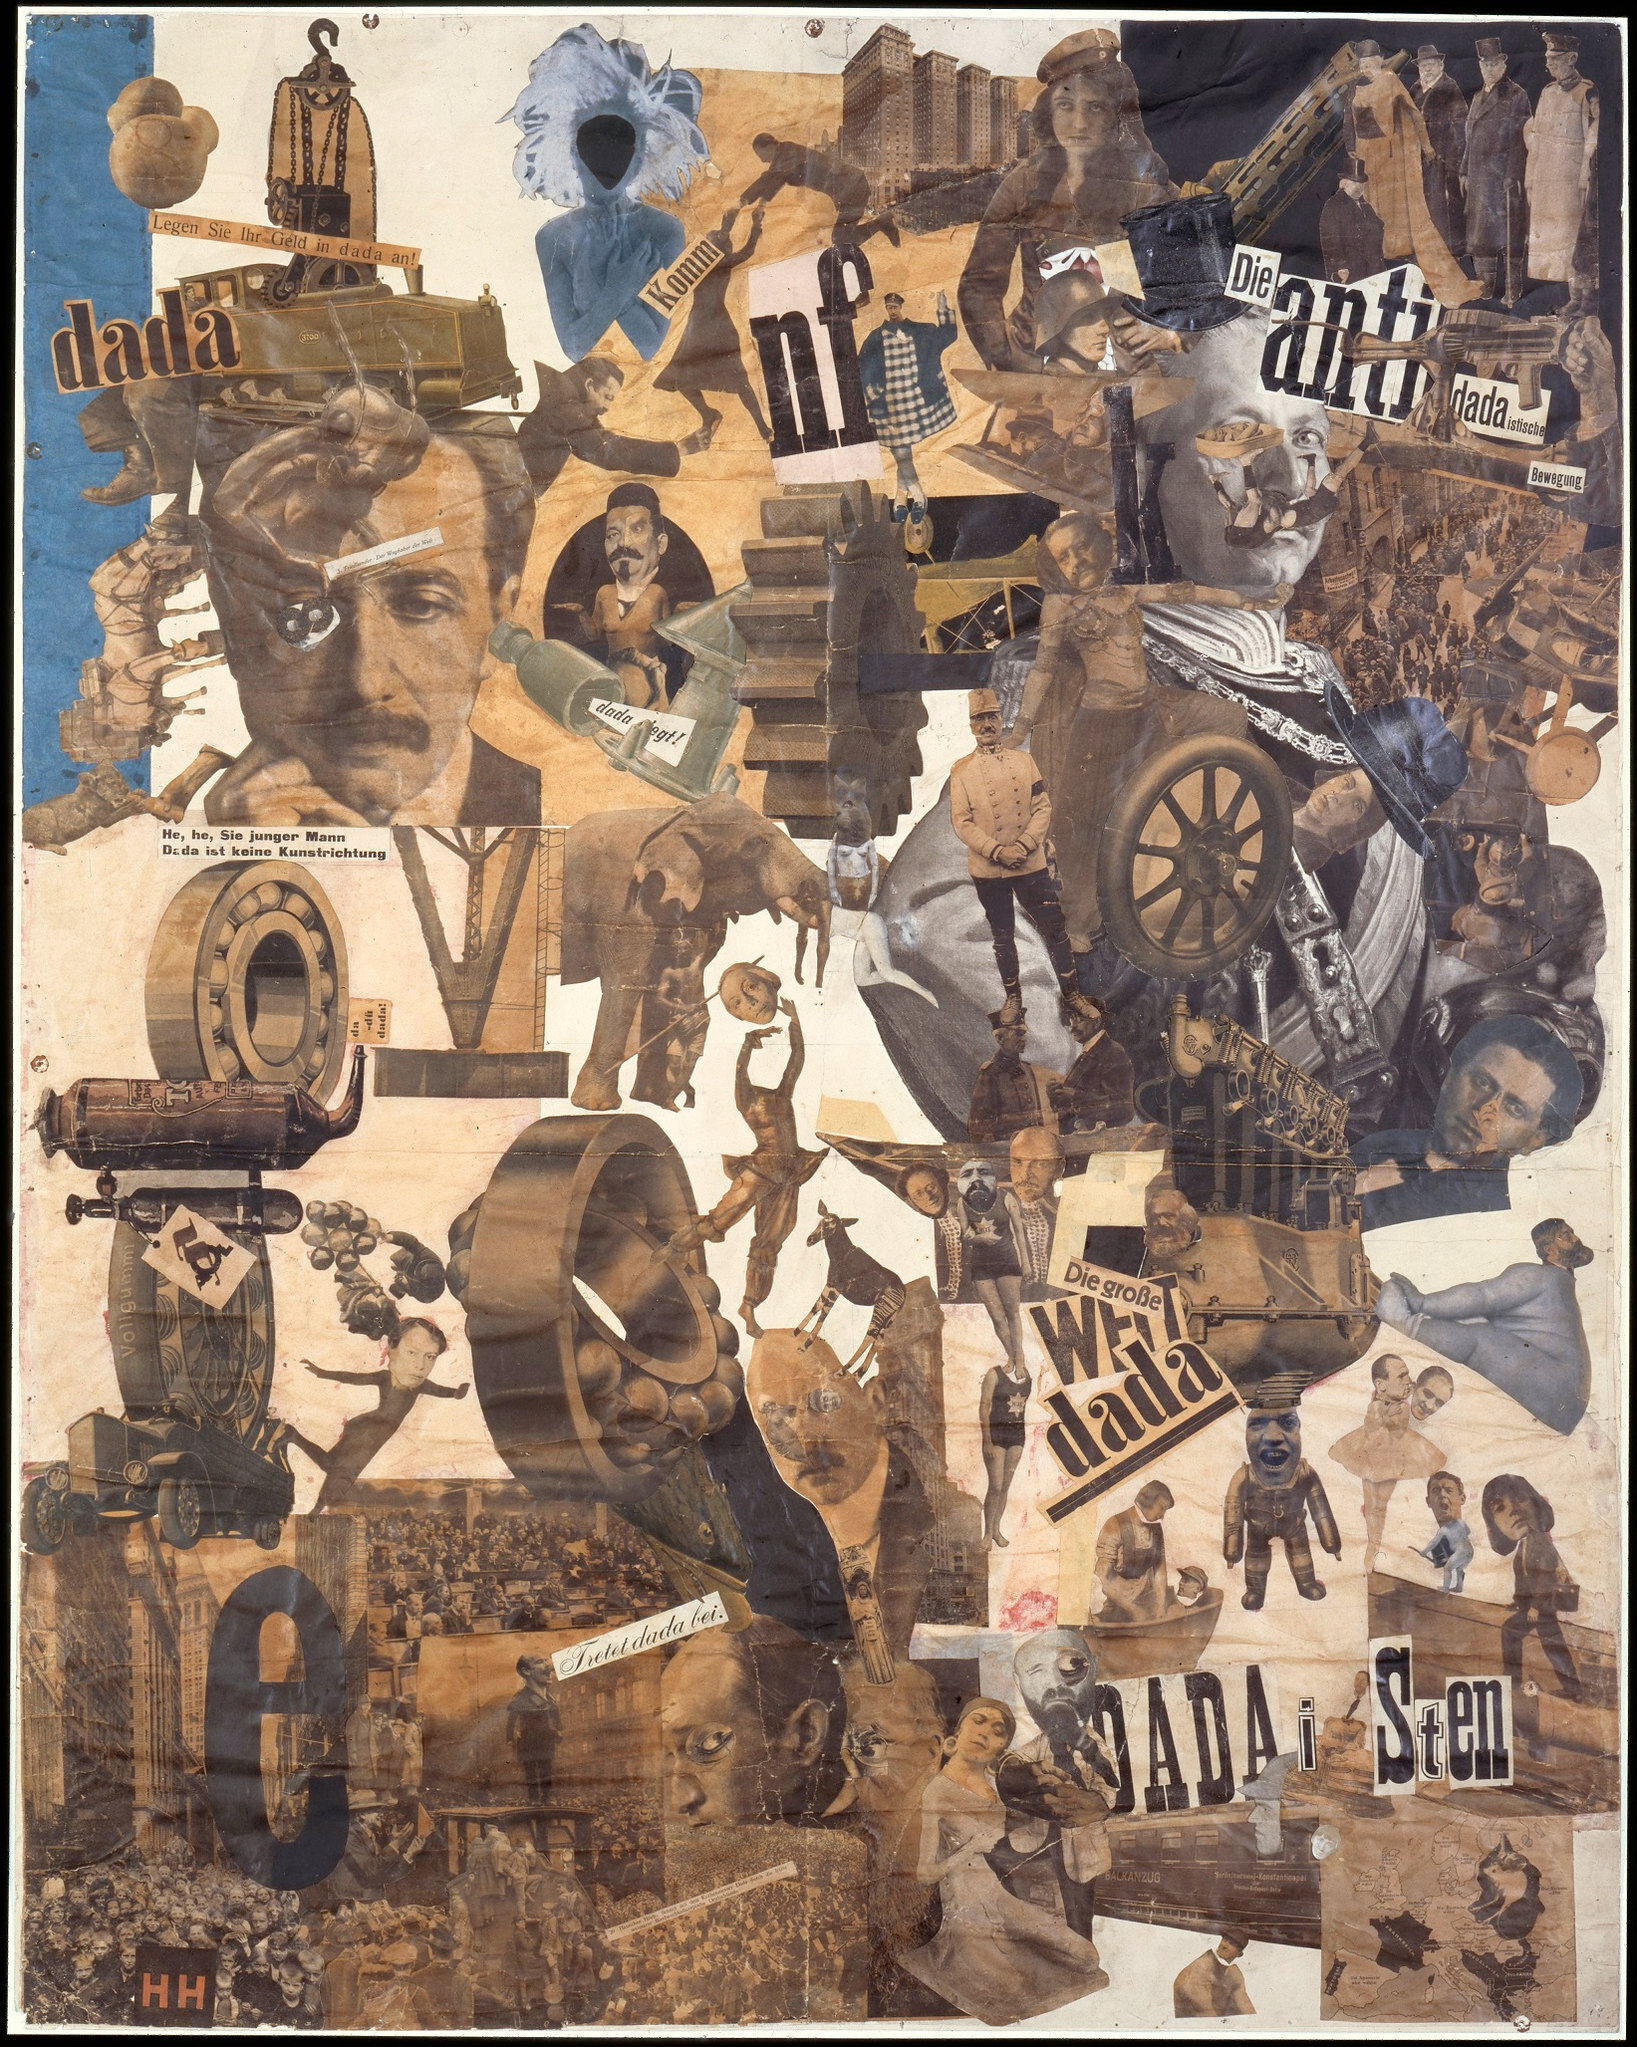 Hannah Höch, Cut with the Kitchen Knife Dada Through the Last Weimar Beer-Belly Cultural Epoch of Germany, collage, mixed media, 1919-1920